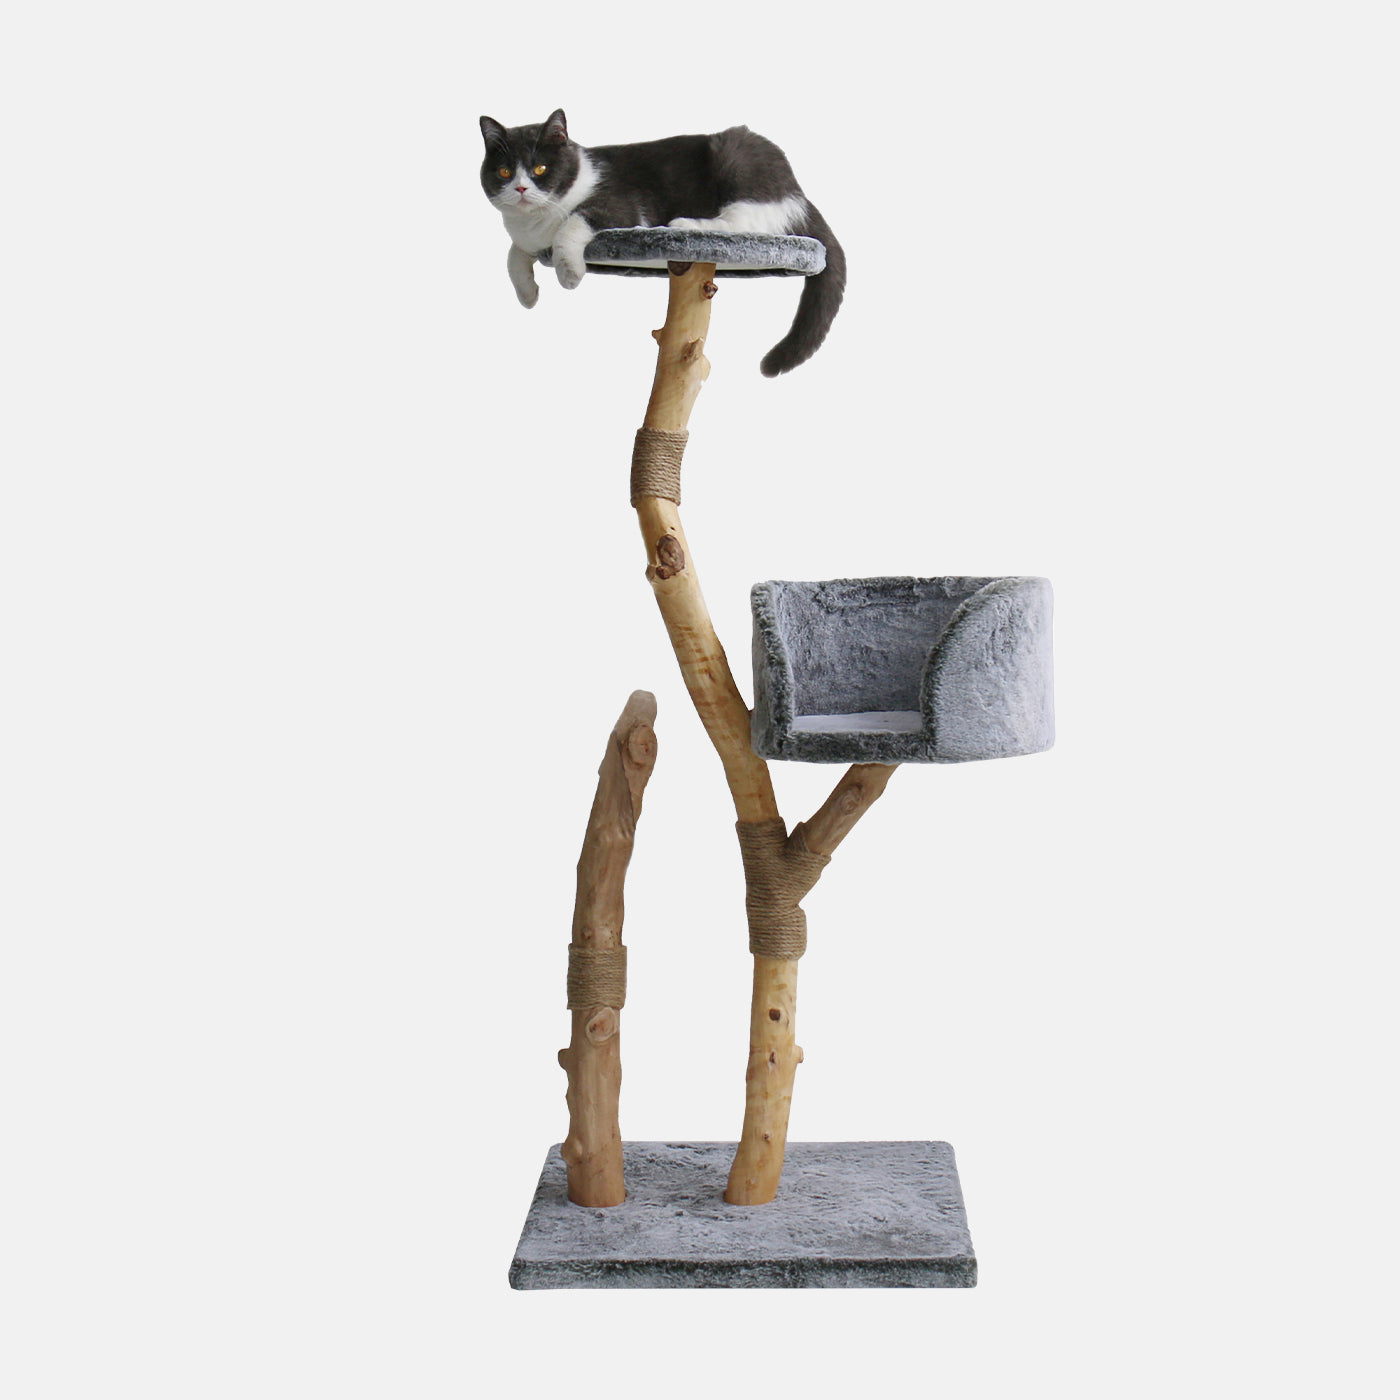 Discover our Luxury Back to Nature The Trio Cat Scratch Post. Features High Sided Cozy Platforms For Kittens and Cats To Rest, Made From Thick Natural Wood Perfect For Scratching! Available Now at Lords & Labradors US